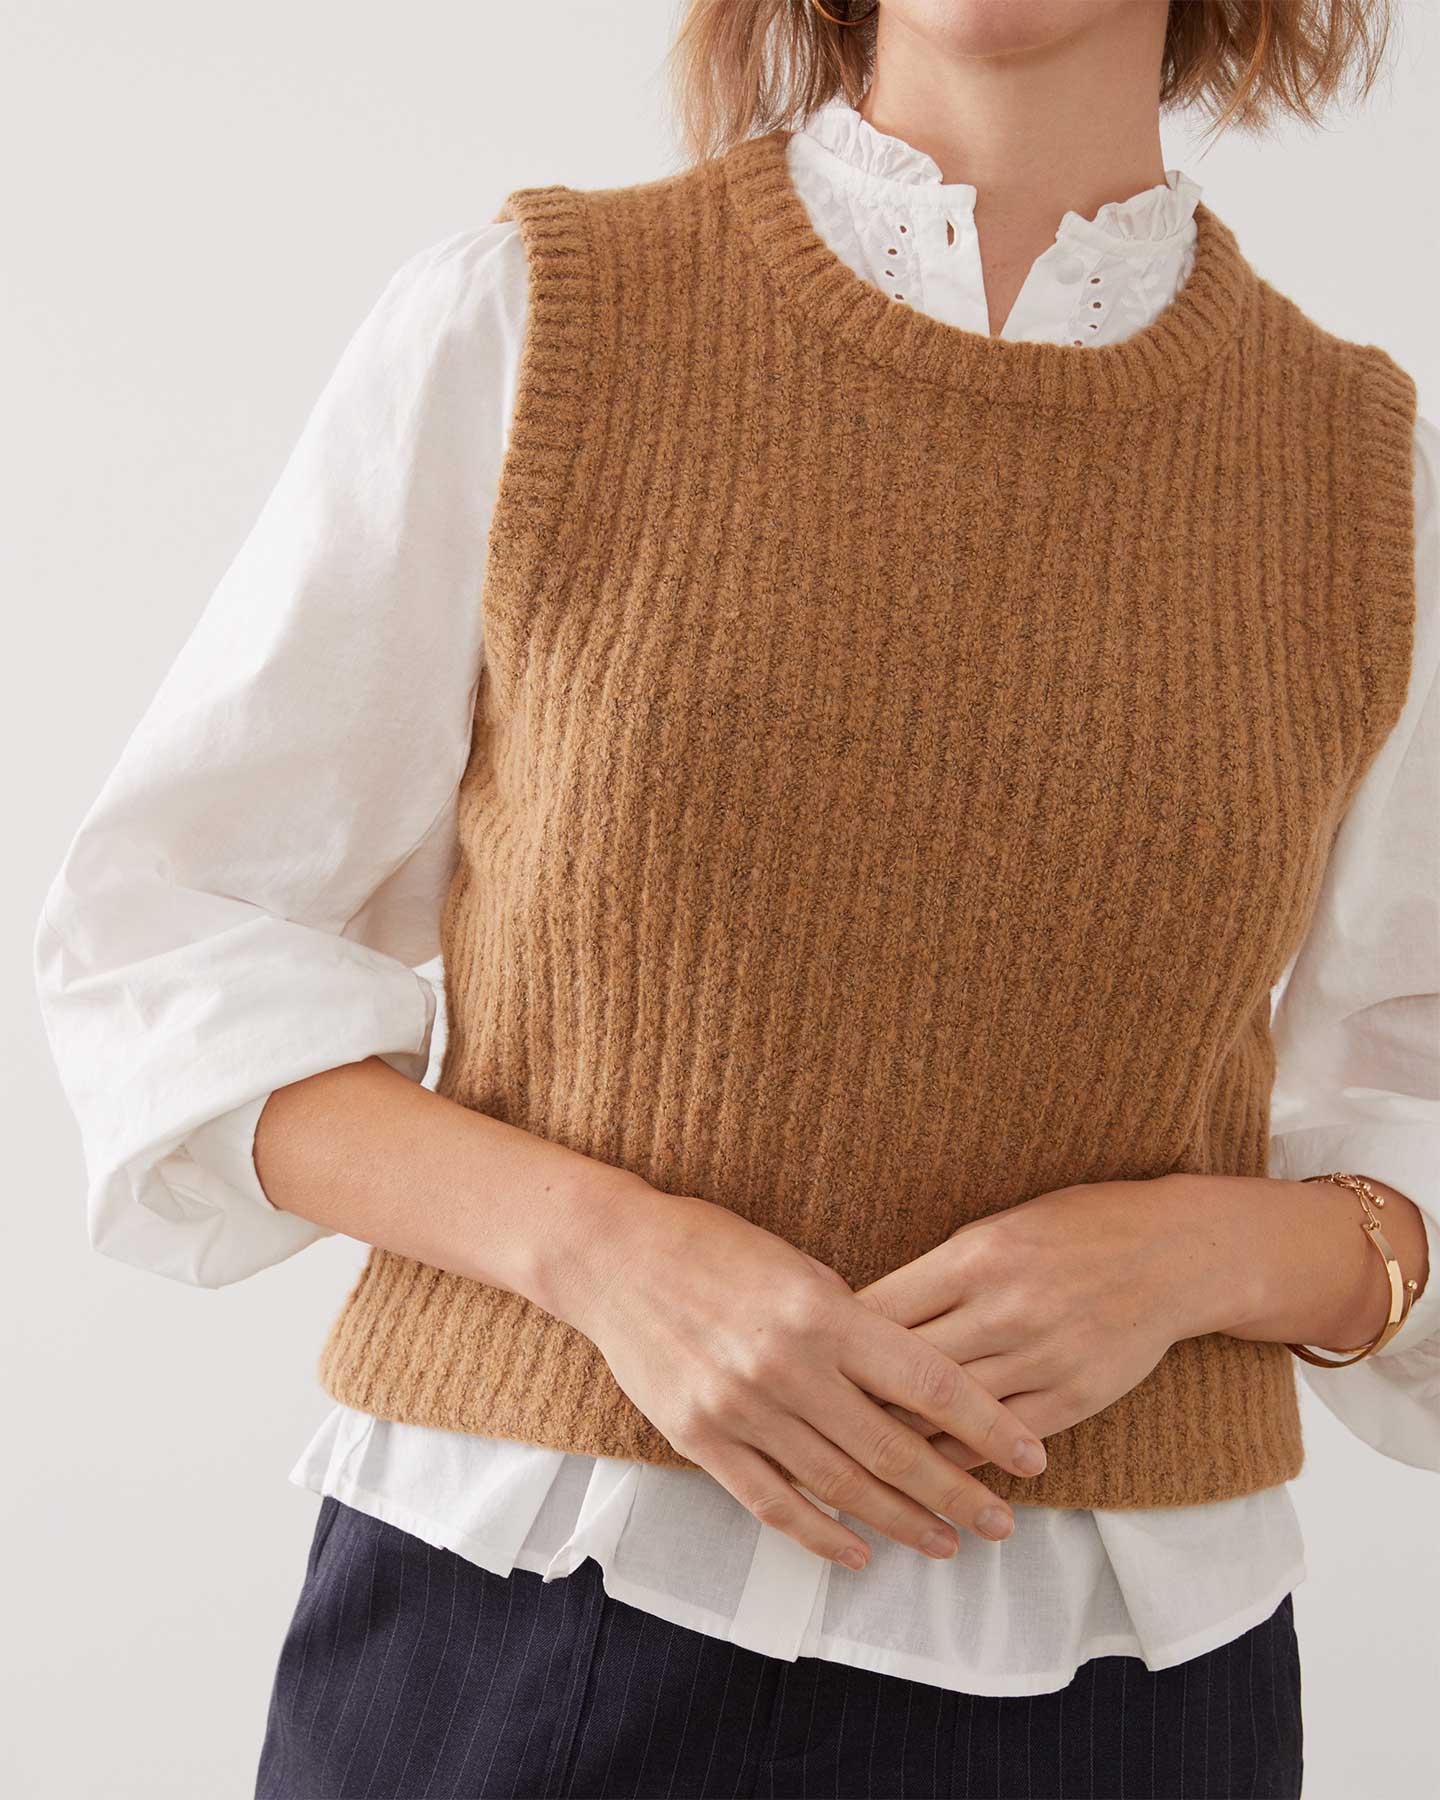 Best Sweater Vests For Women & How To Wear Them